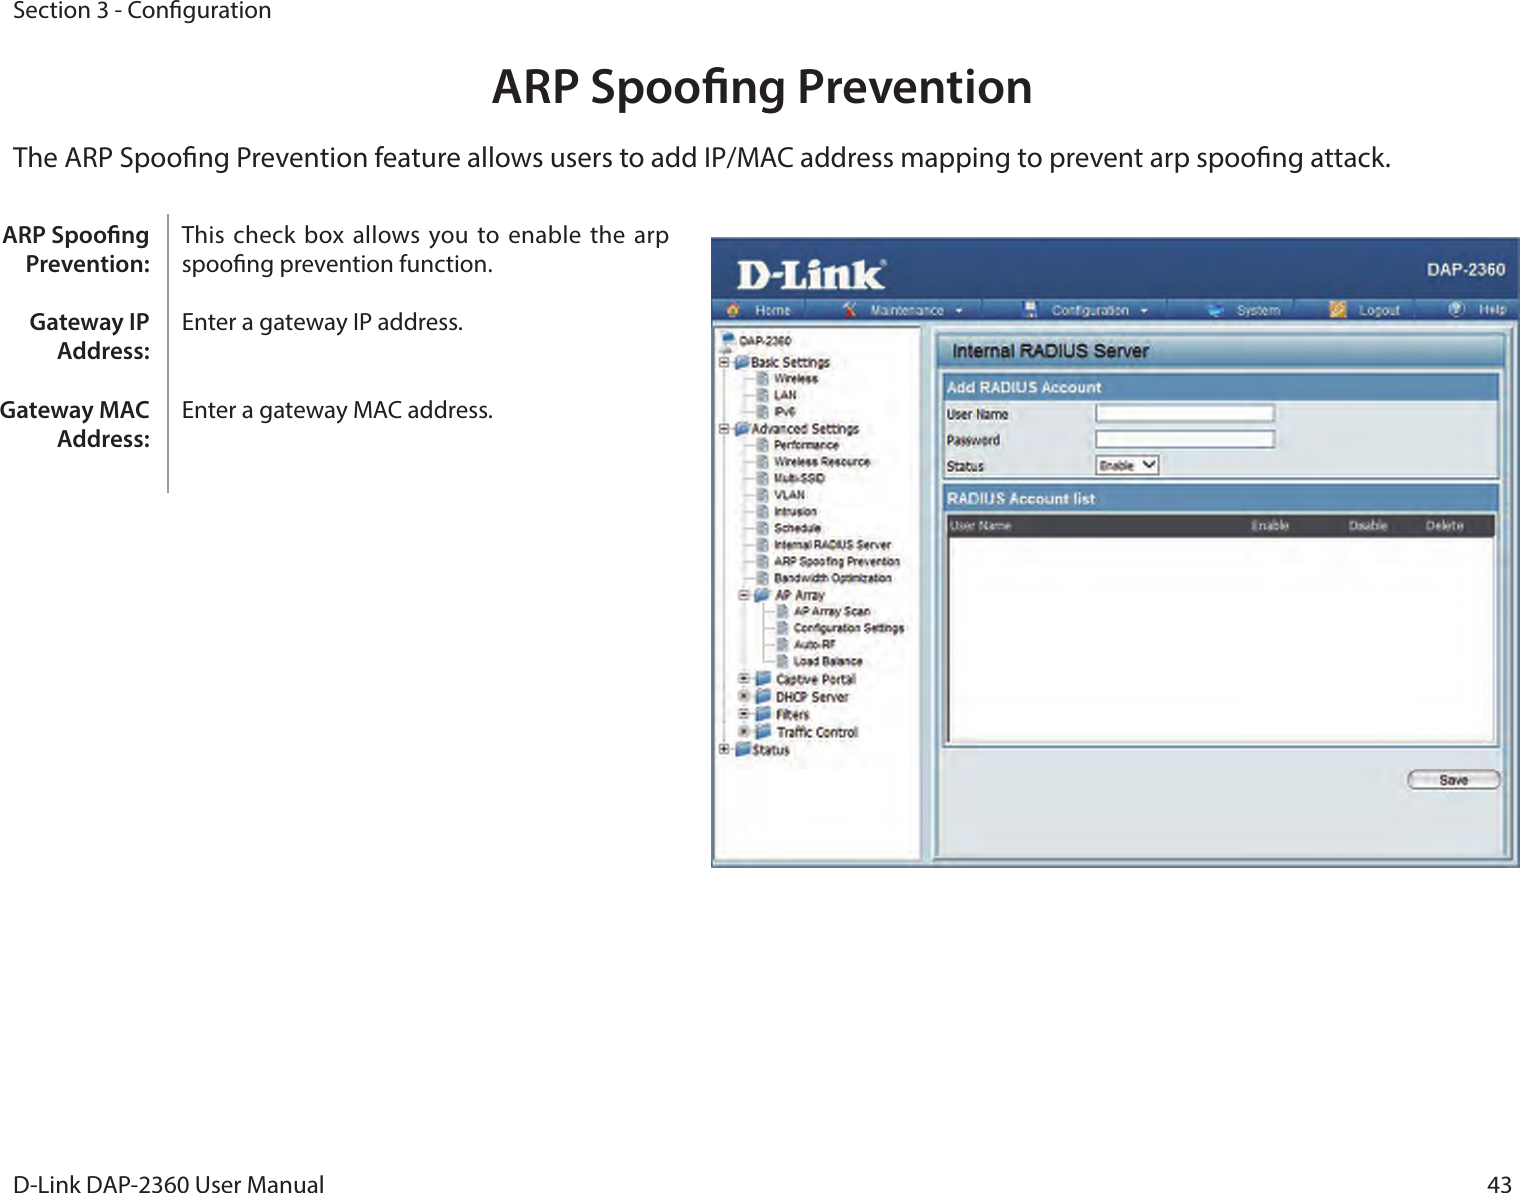 43D-Link DAP-2360 User ManualSection 3 - CongurationARP Spoong PreventionThe ARP Spoong Prevention feature allows users to add IP/MAC address mapping to prevent arp spoong attack.This check box allows you to enable  the arp spoong prevention function.  Enter a gateway IP address. Enter a gateway MAC address. ARP Spoong Prevention:Gateway IP Address:Gateway MAC Address: